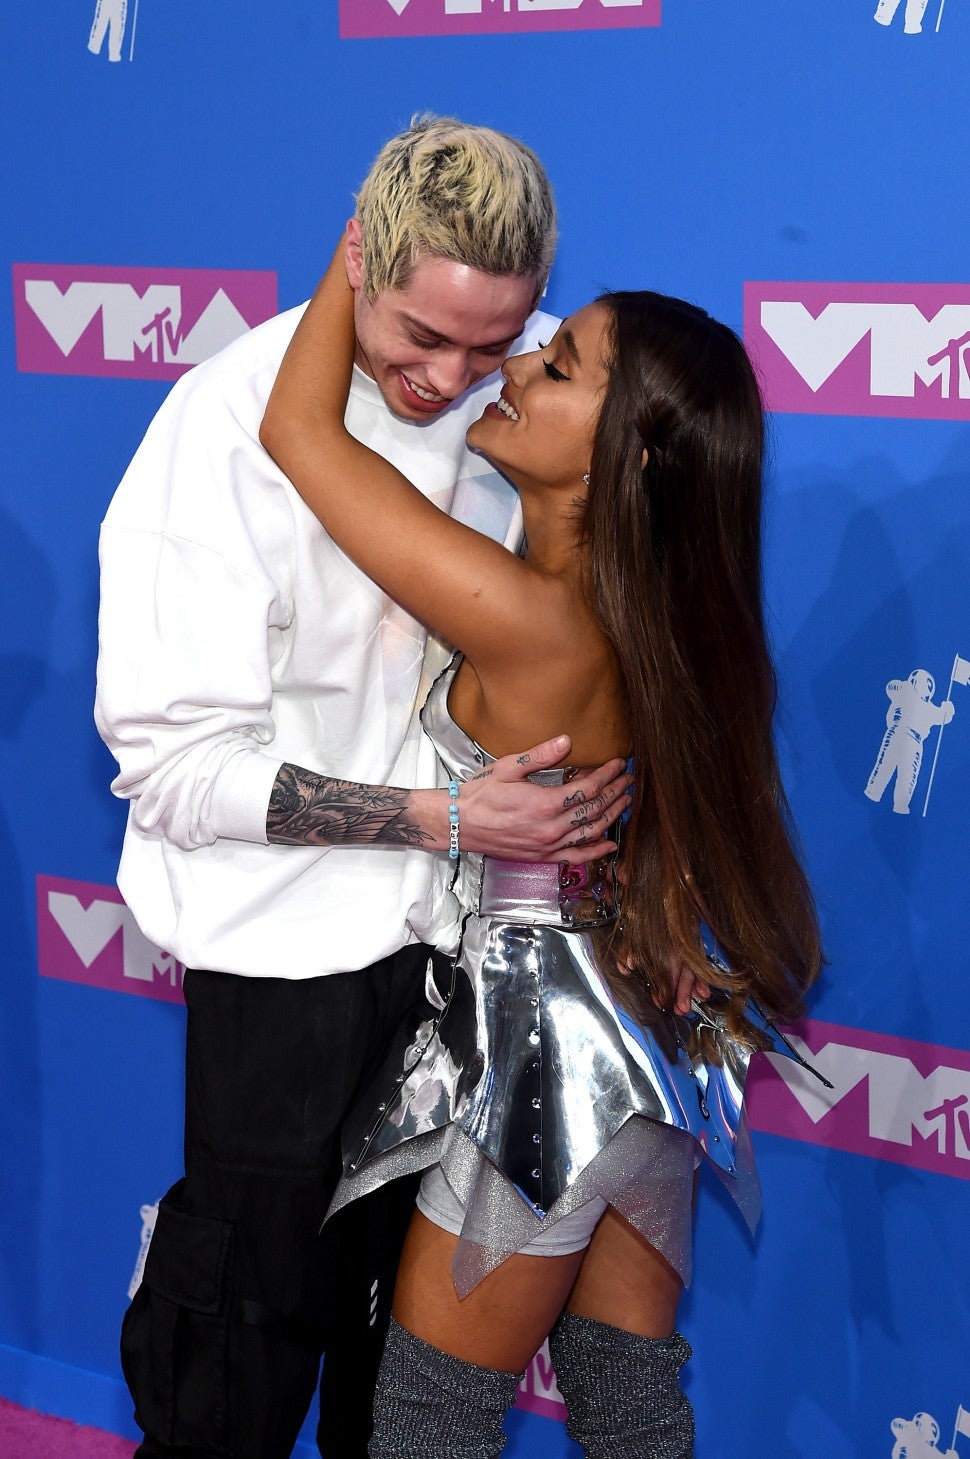  Pete Davidson and Ariana Grande attend the 2018 MTV Video Music Awards at Radio City Music Hall on August 20, 2018 in New York City.